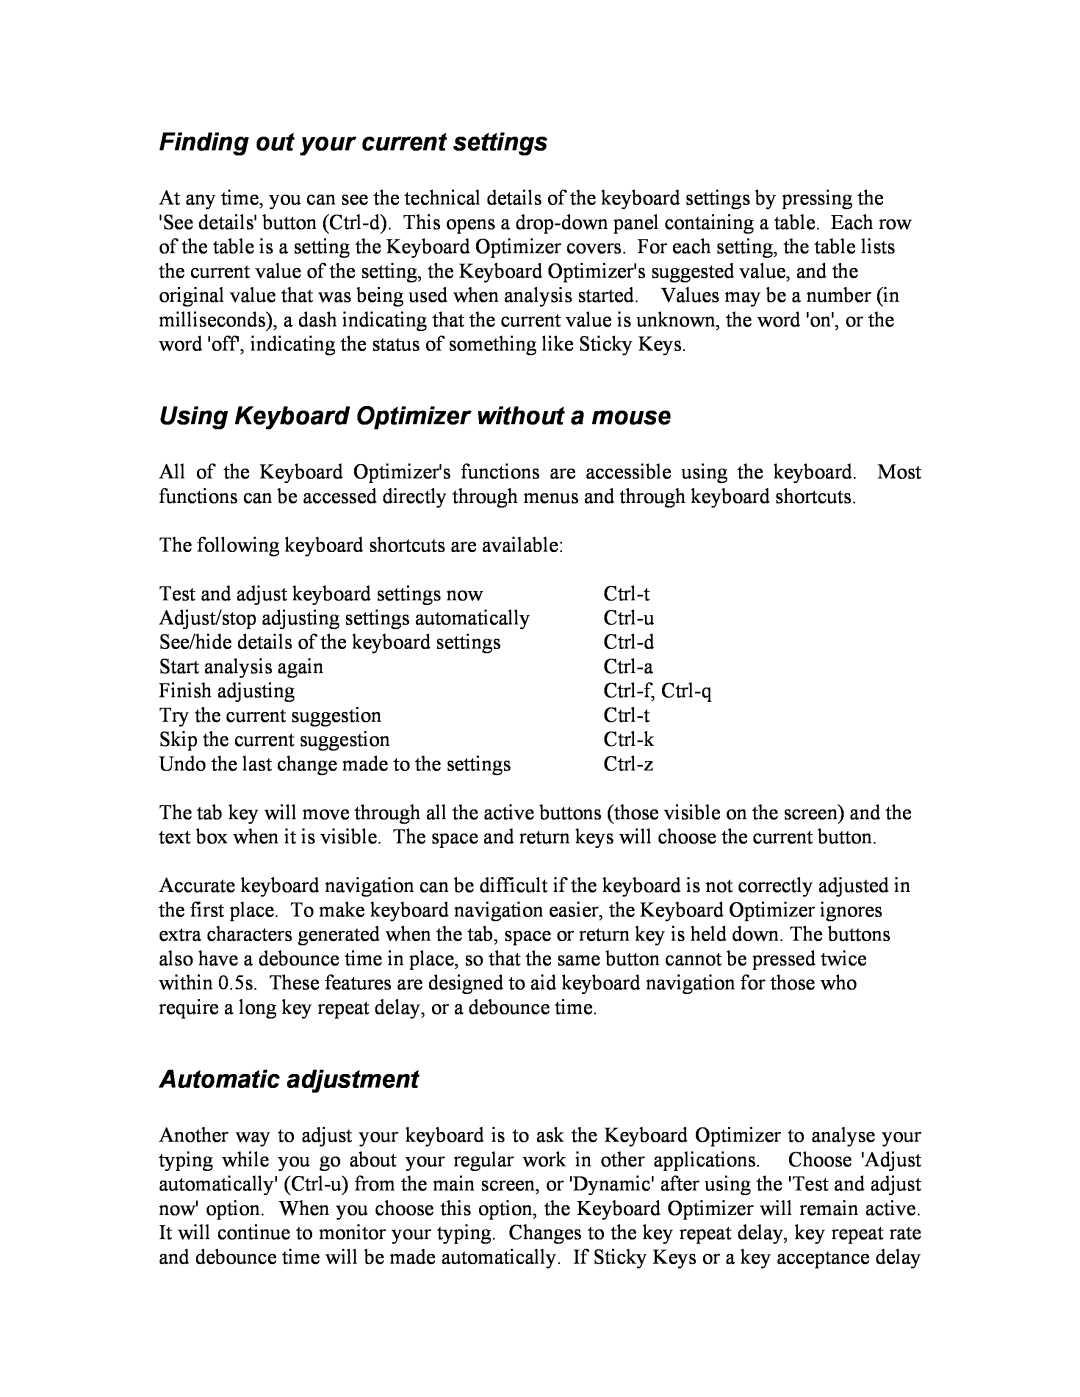 IBM manual Finding out your current settings, Using Keyboard Optimizer without a mouse, Automatic adjustment 